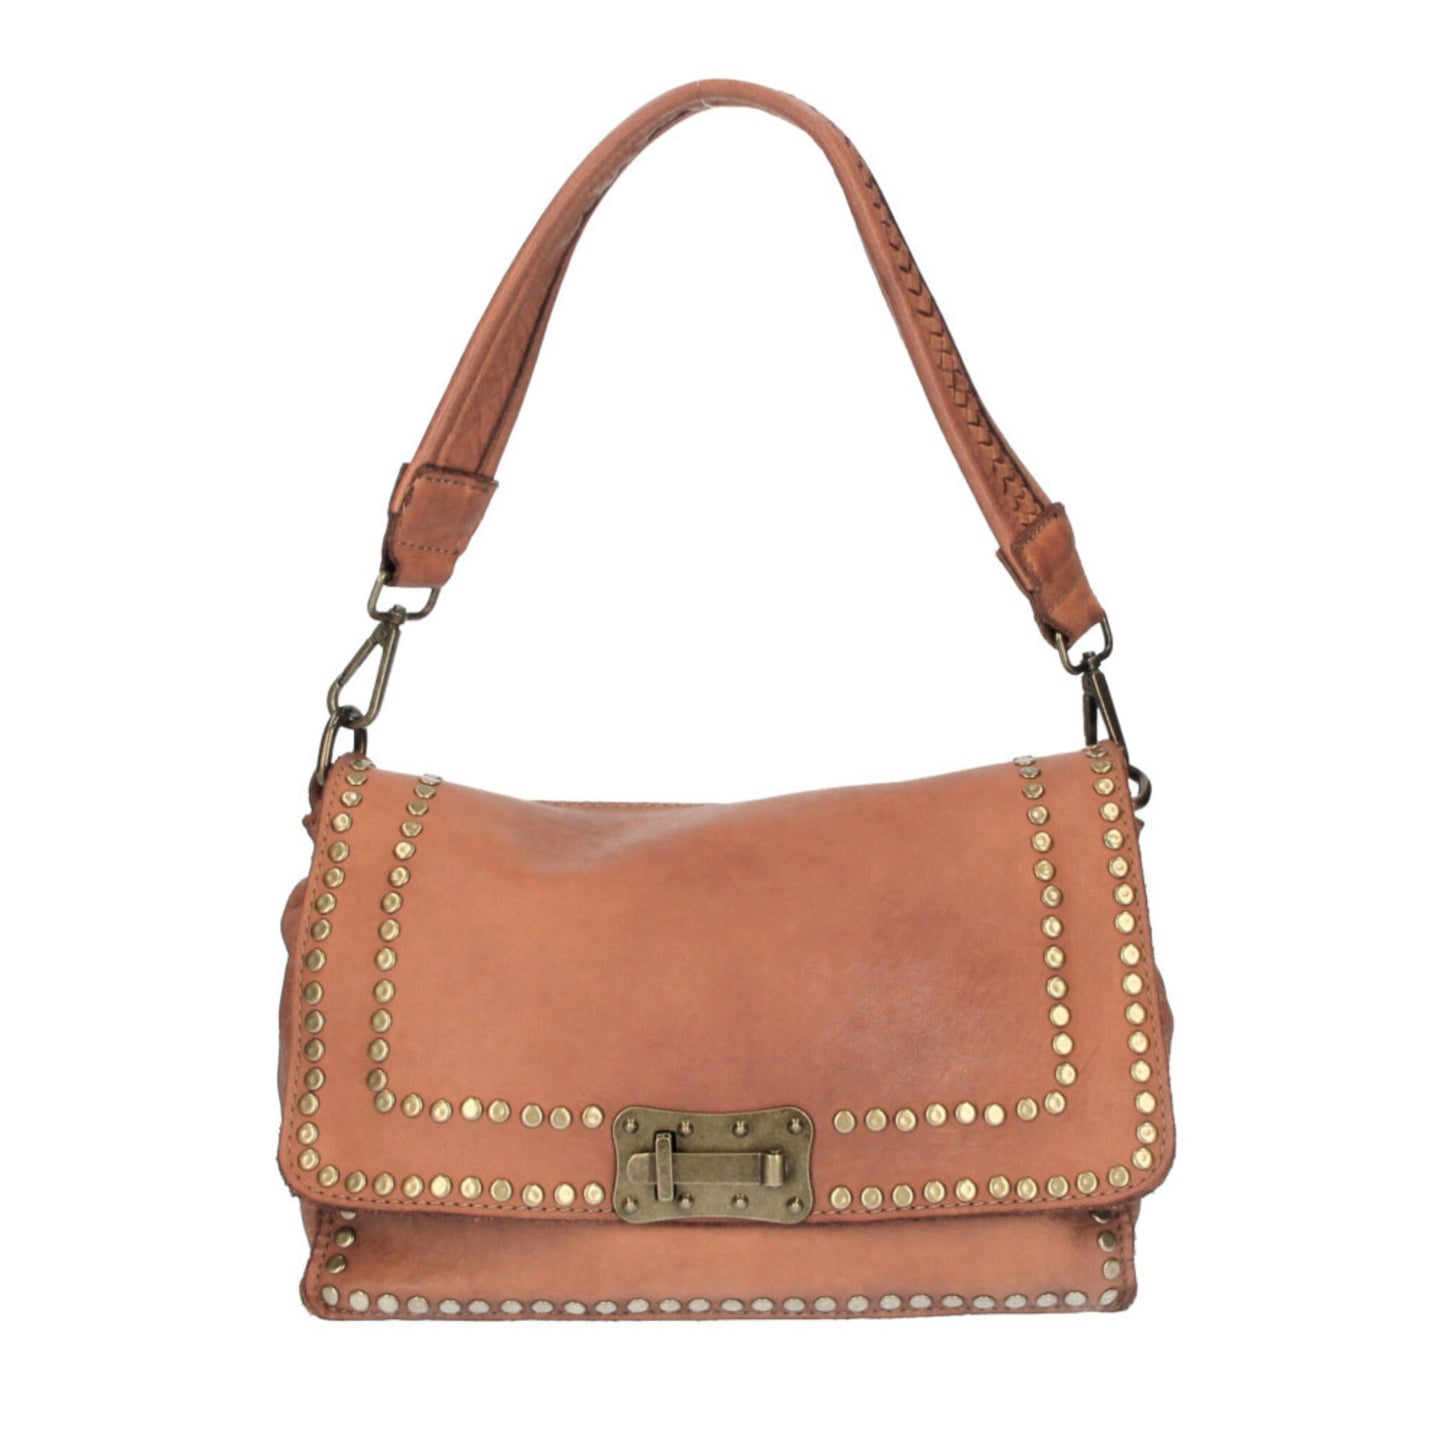 The Studded Vintage Style Leather Bag